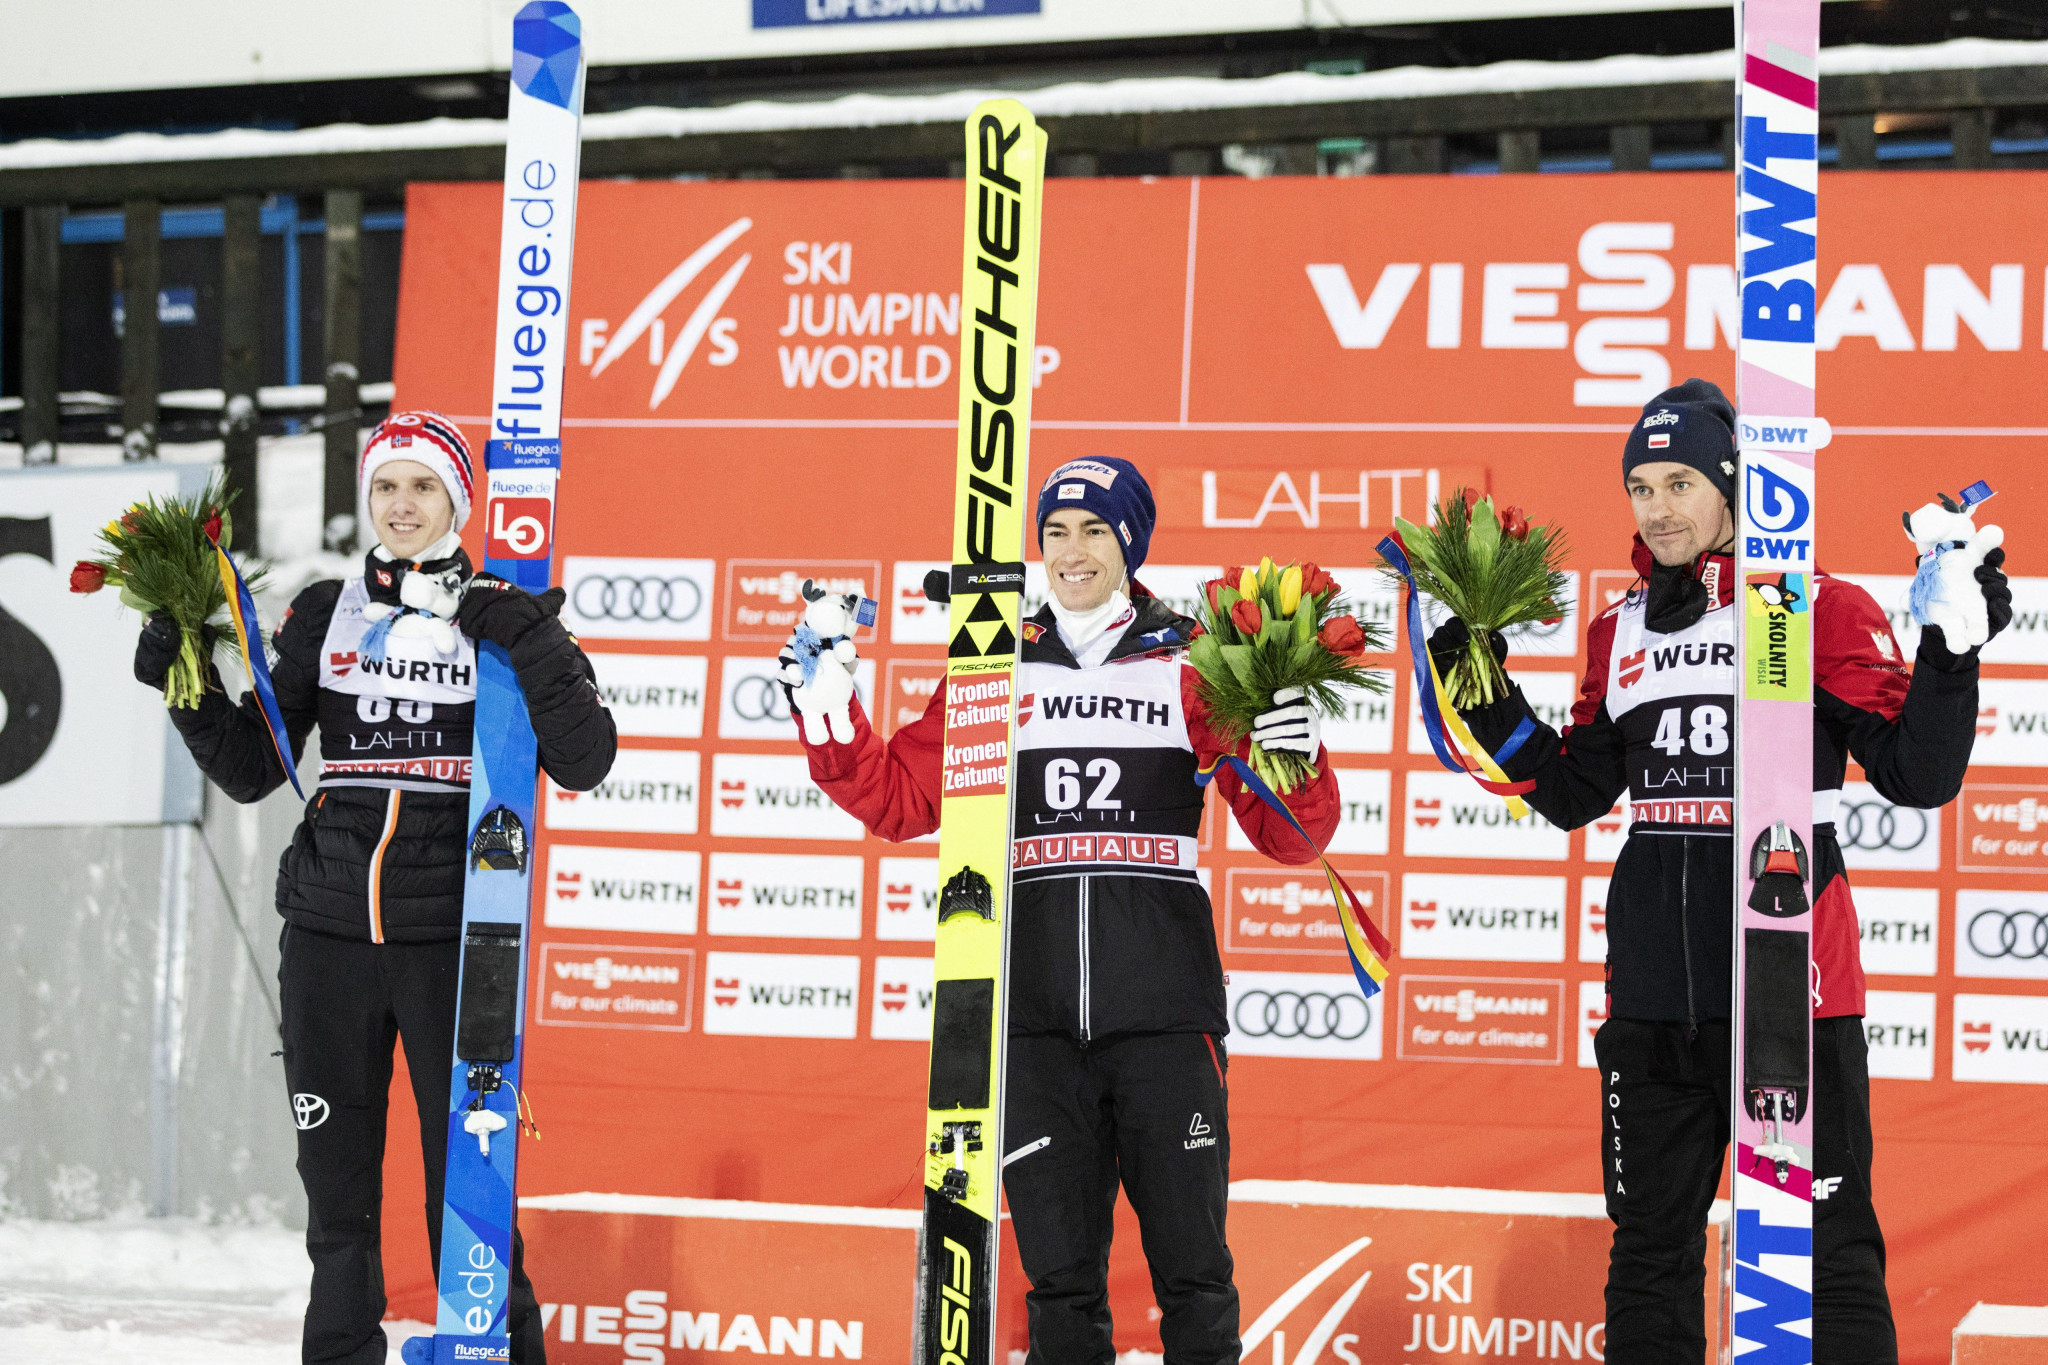 Lahti hosted an FIS Ski Jumping World Cup event earlier this year @Getty Images